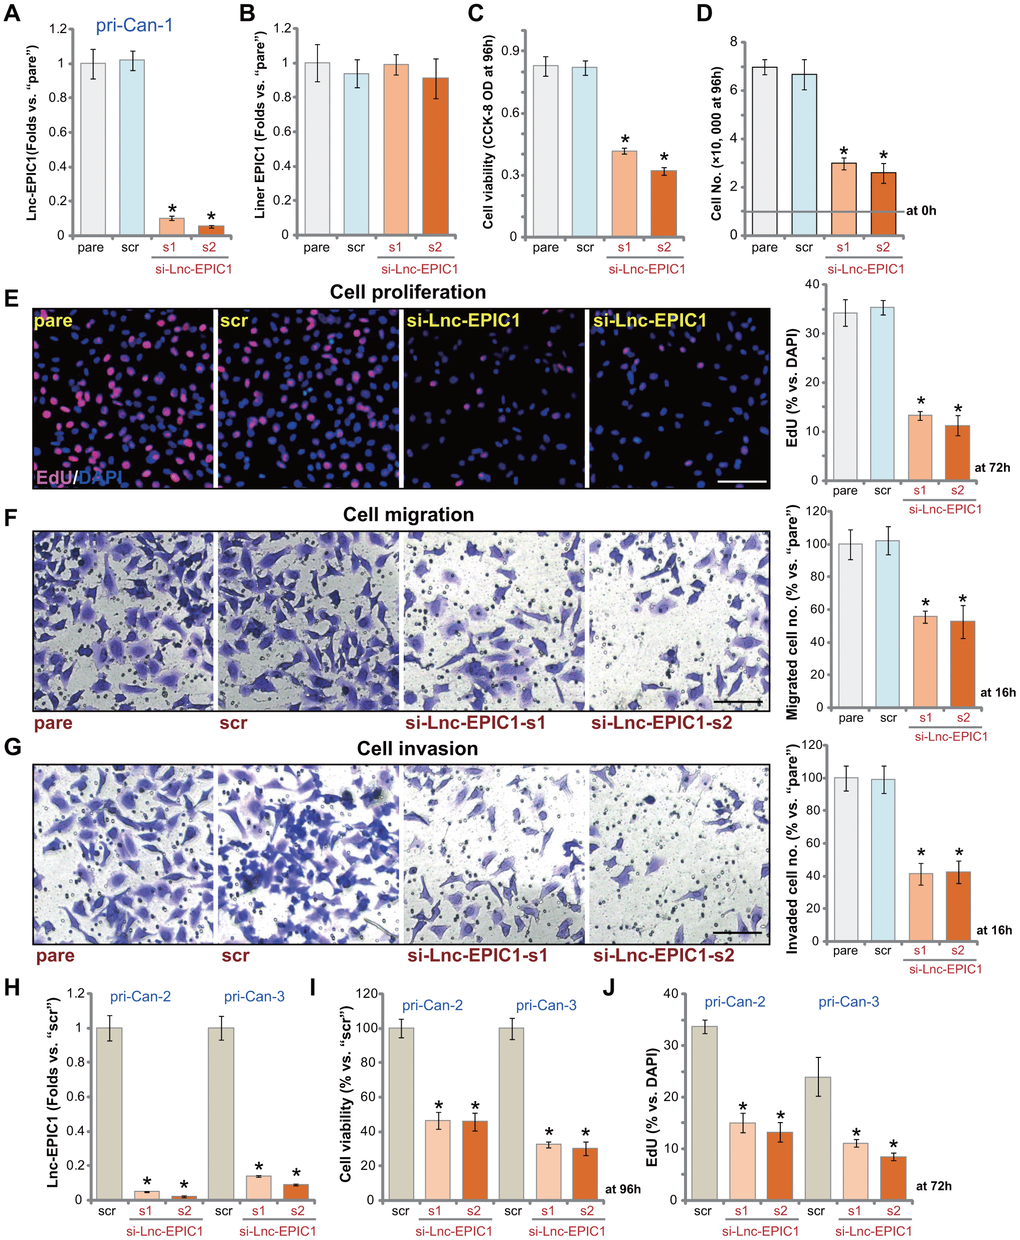 Lnc-EPIC1 siRNA inhibits colon cancer cell growth, proliferation, migration and invasion. The primary human colon cancer cells, pri-Can-1/-2/-3, were transfected with scramble control siRNA (“scr”, 500 nM) or the applied Lnc-EPIC1 siRNA (si-Lnc-EPIC1-s1/si-Lnc-EPIC1-s2, 500 nM), cells were further cultured for 48h, and expression of Lnc-EPIC1 and linear EPIC1 was tested by qPCR assays (A, B, H); Cells were further cultured for applied time periods, cell viability was examined by CCK-8 assays (C, I); Cell growth and proliferation were examined by cell counting assay (D) and nuclear EdU staining (E, J). Cell migration and invasion were tested by “Transwell” (F) and “Matrigel Transwell” (G) assays, respectively. For EdU studies, ten random views of each treatment were included to calculate the average EdU ratio (% vs. DAPI, same for all Figures). For “Transwell”/“Martial Transwell” assays, in each condition ten random views were included to calculate the average number of migrated/invaded cells (same for all Figures). The exact same number of viable colon cancer cells with different genetic modifications were initially seeded into each well or each dish (at 0h, same for all Figures). “pare” stands for the parental control cells (same for all Figures). Data presented as mean ± standard deviation (SD). * pE–G).